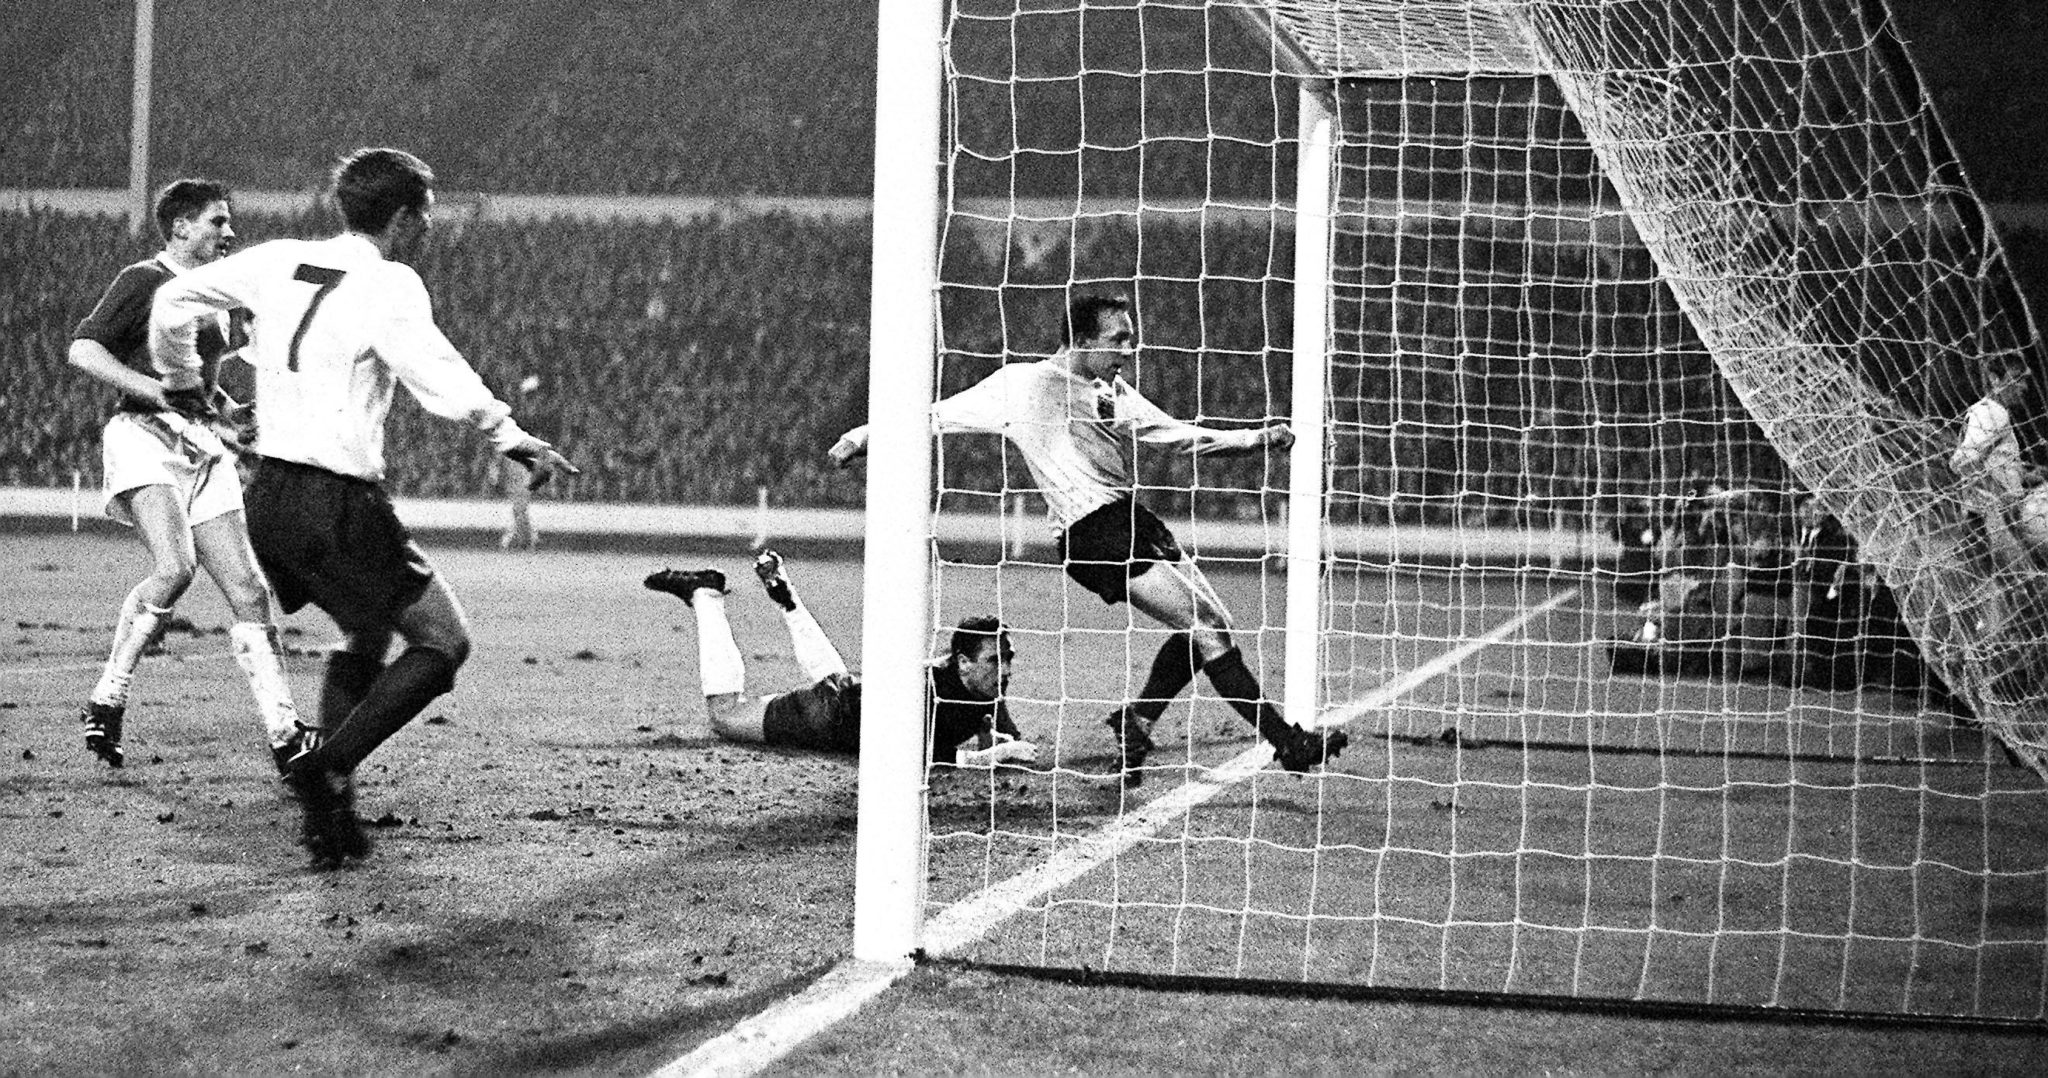 England's first goal scored by Nobby Stiles, a surprise choice centre-forward, in the international match against West Germany at Wembley. Also in picture is Alan Ball, England right winger (No 7).